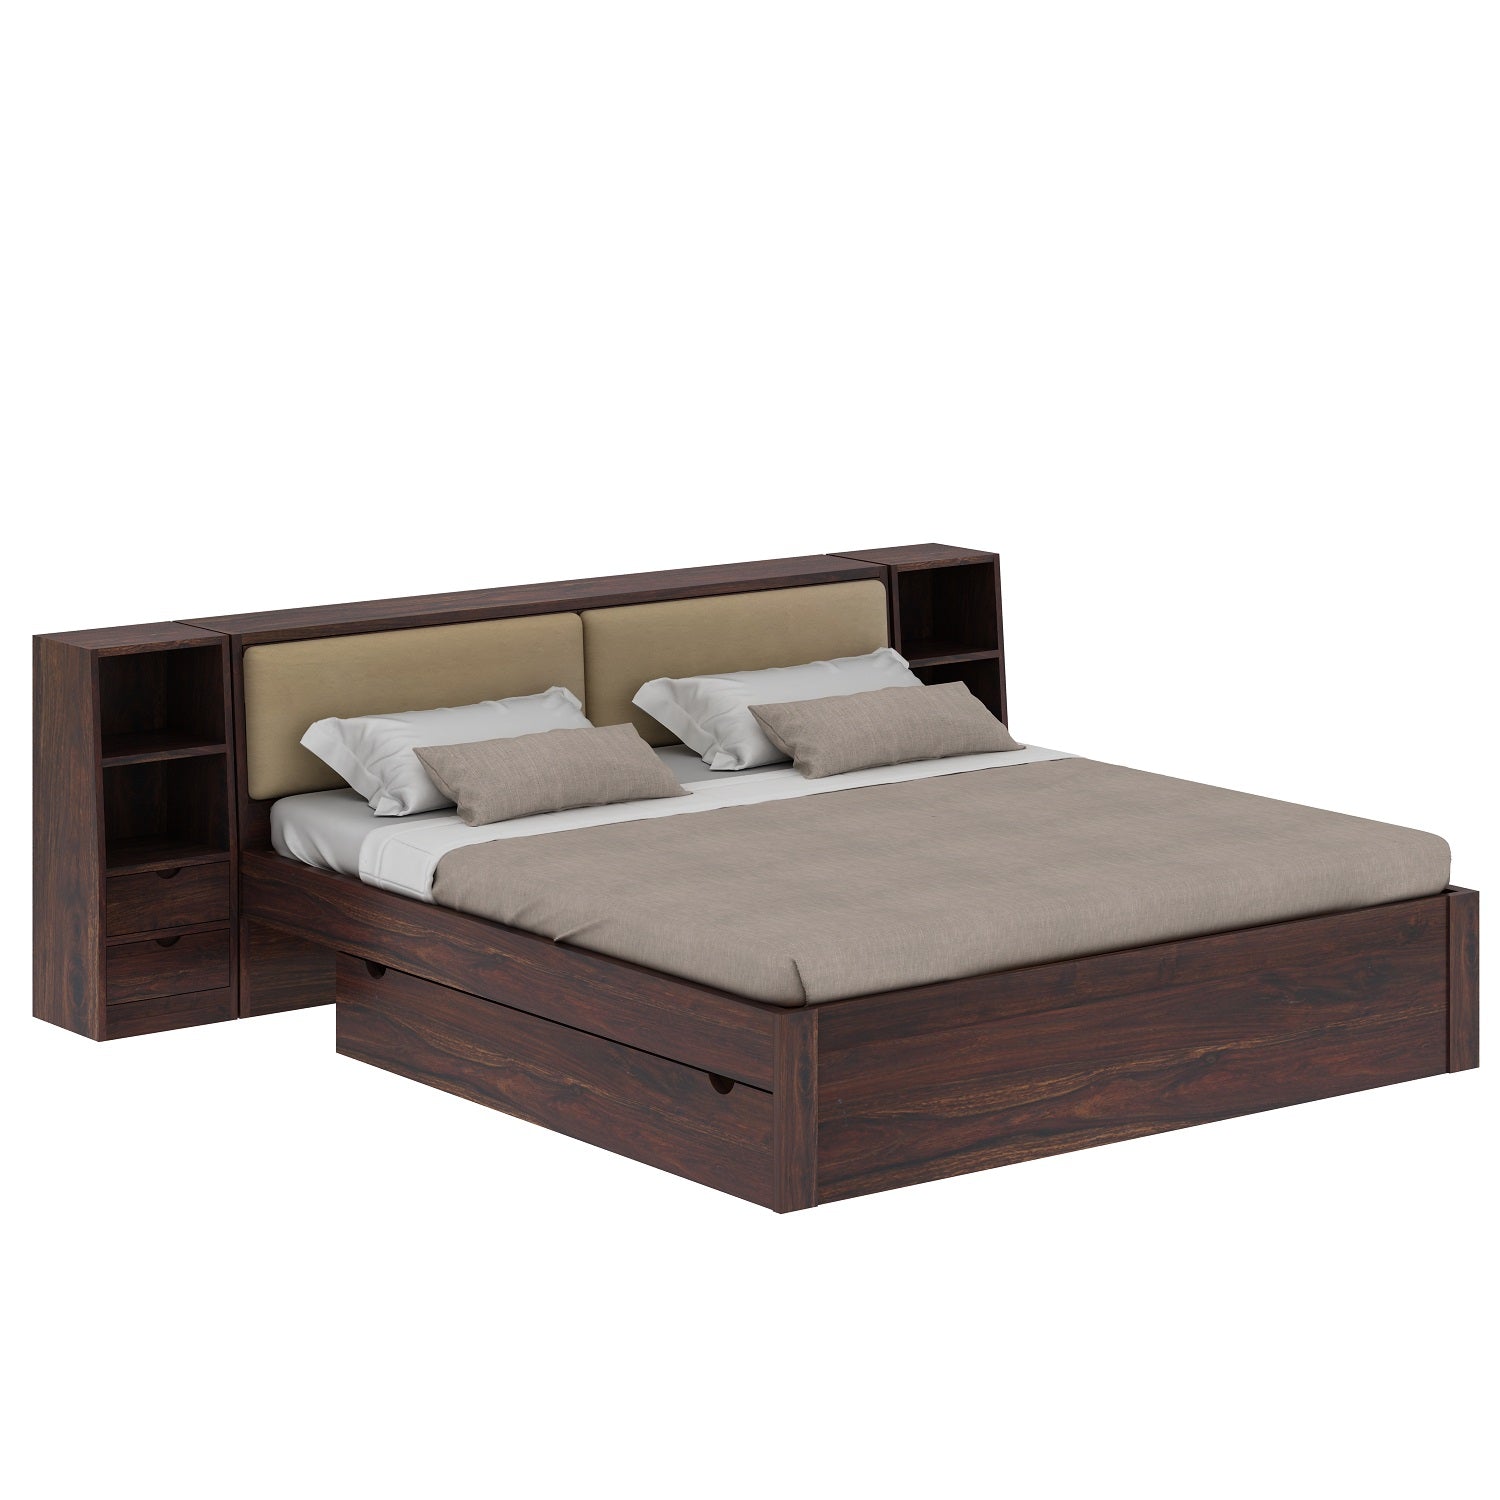 Solid Sheesham Wood Lumin Bed With Drawer Storage and Side Table